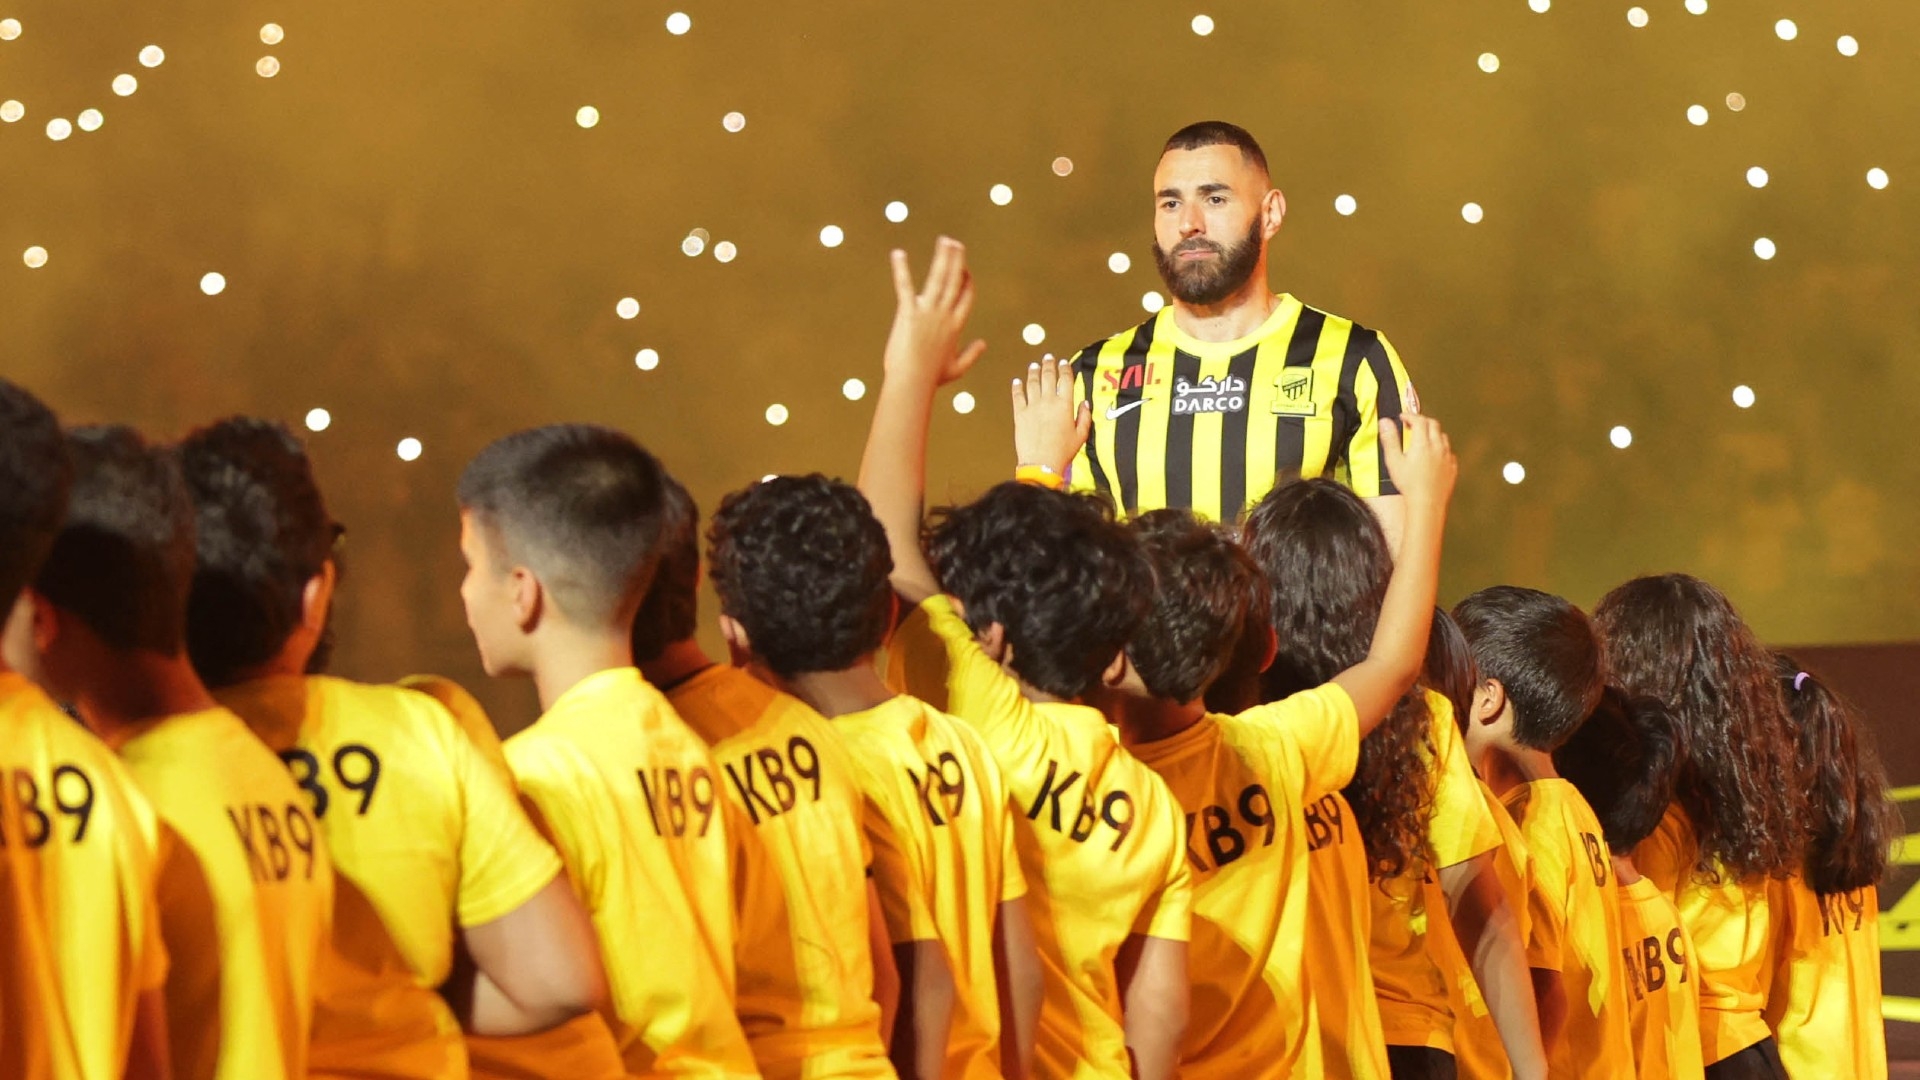 Karim Benzema, surrounded by children taking part in a ceremony, waves to the crowd at King Abdullah Sports City stadium in Jeddah, on 8 June 2023 (AFP)